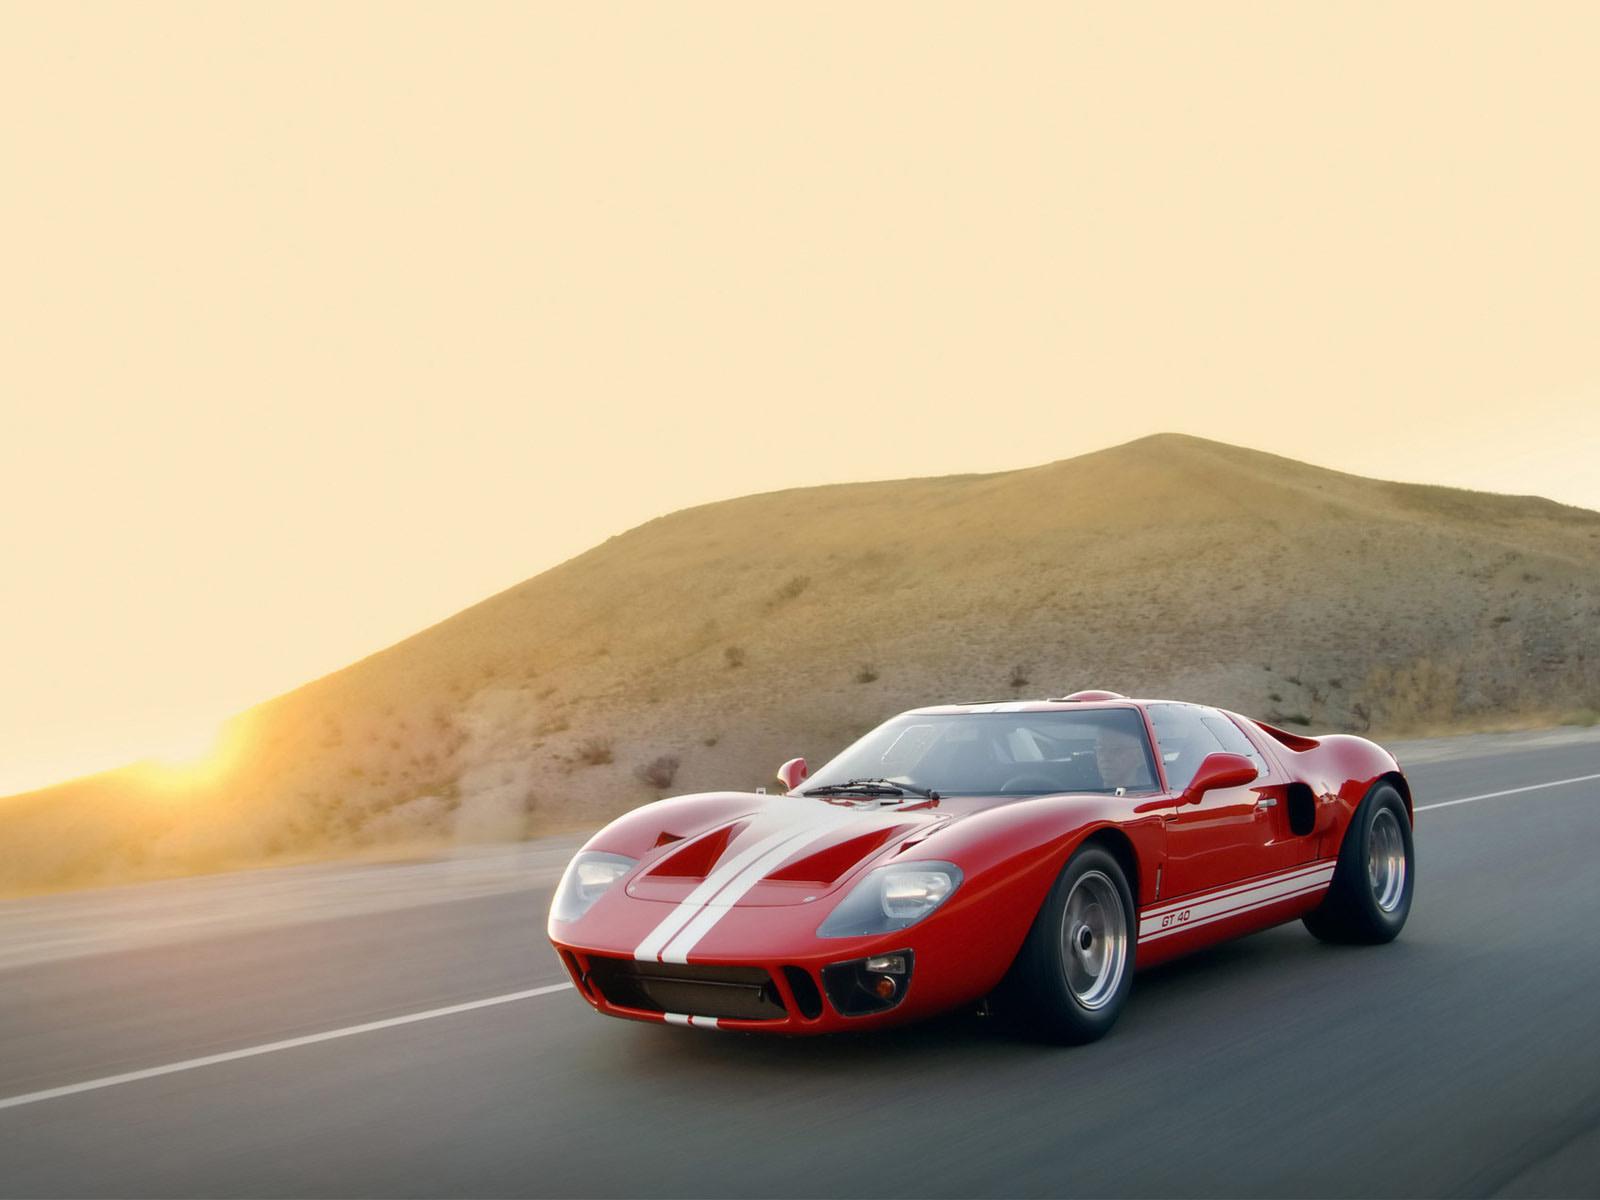 Ford GT image Nom HD wallpaper and background photo